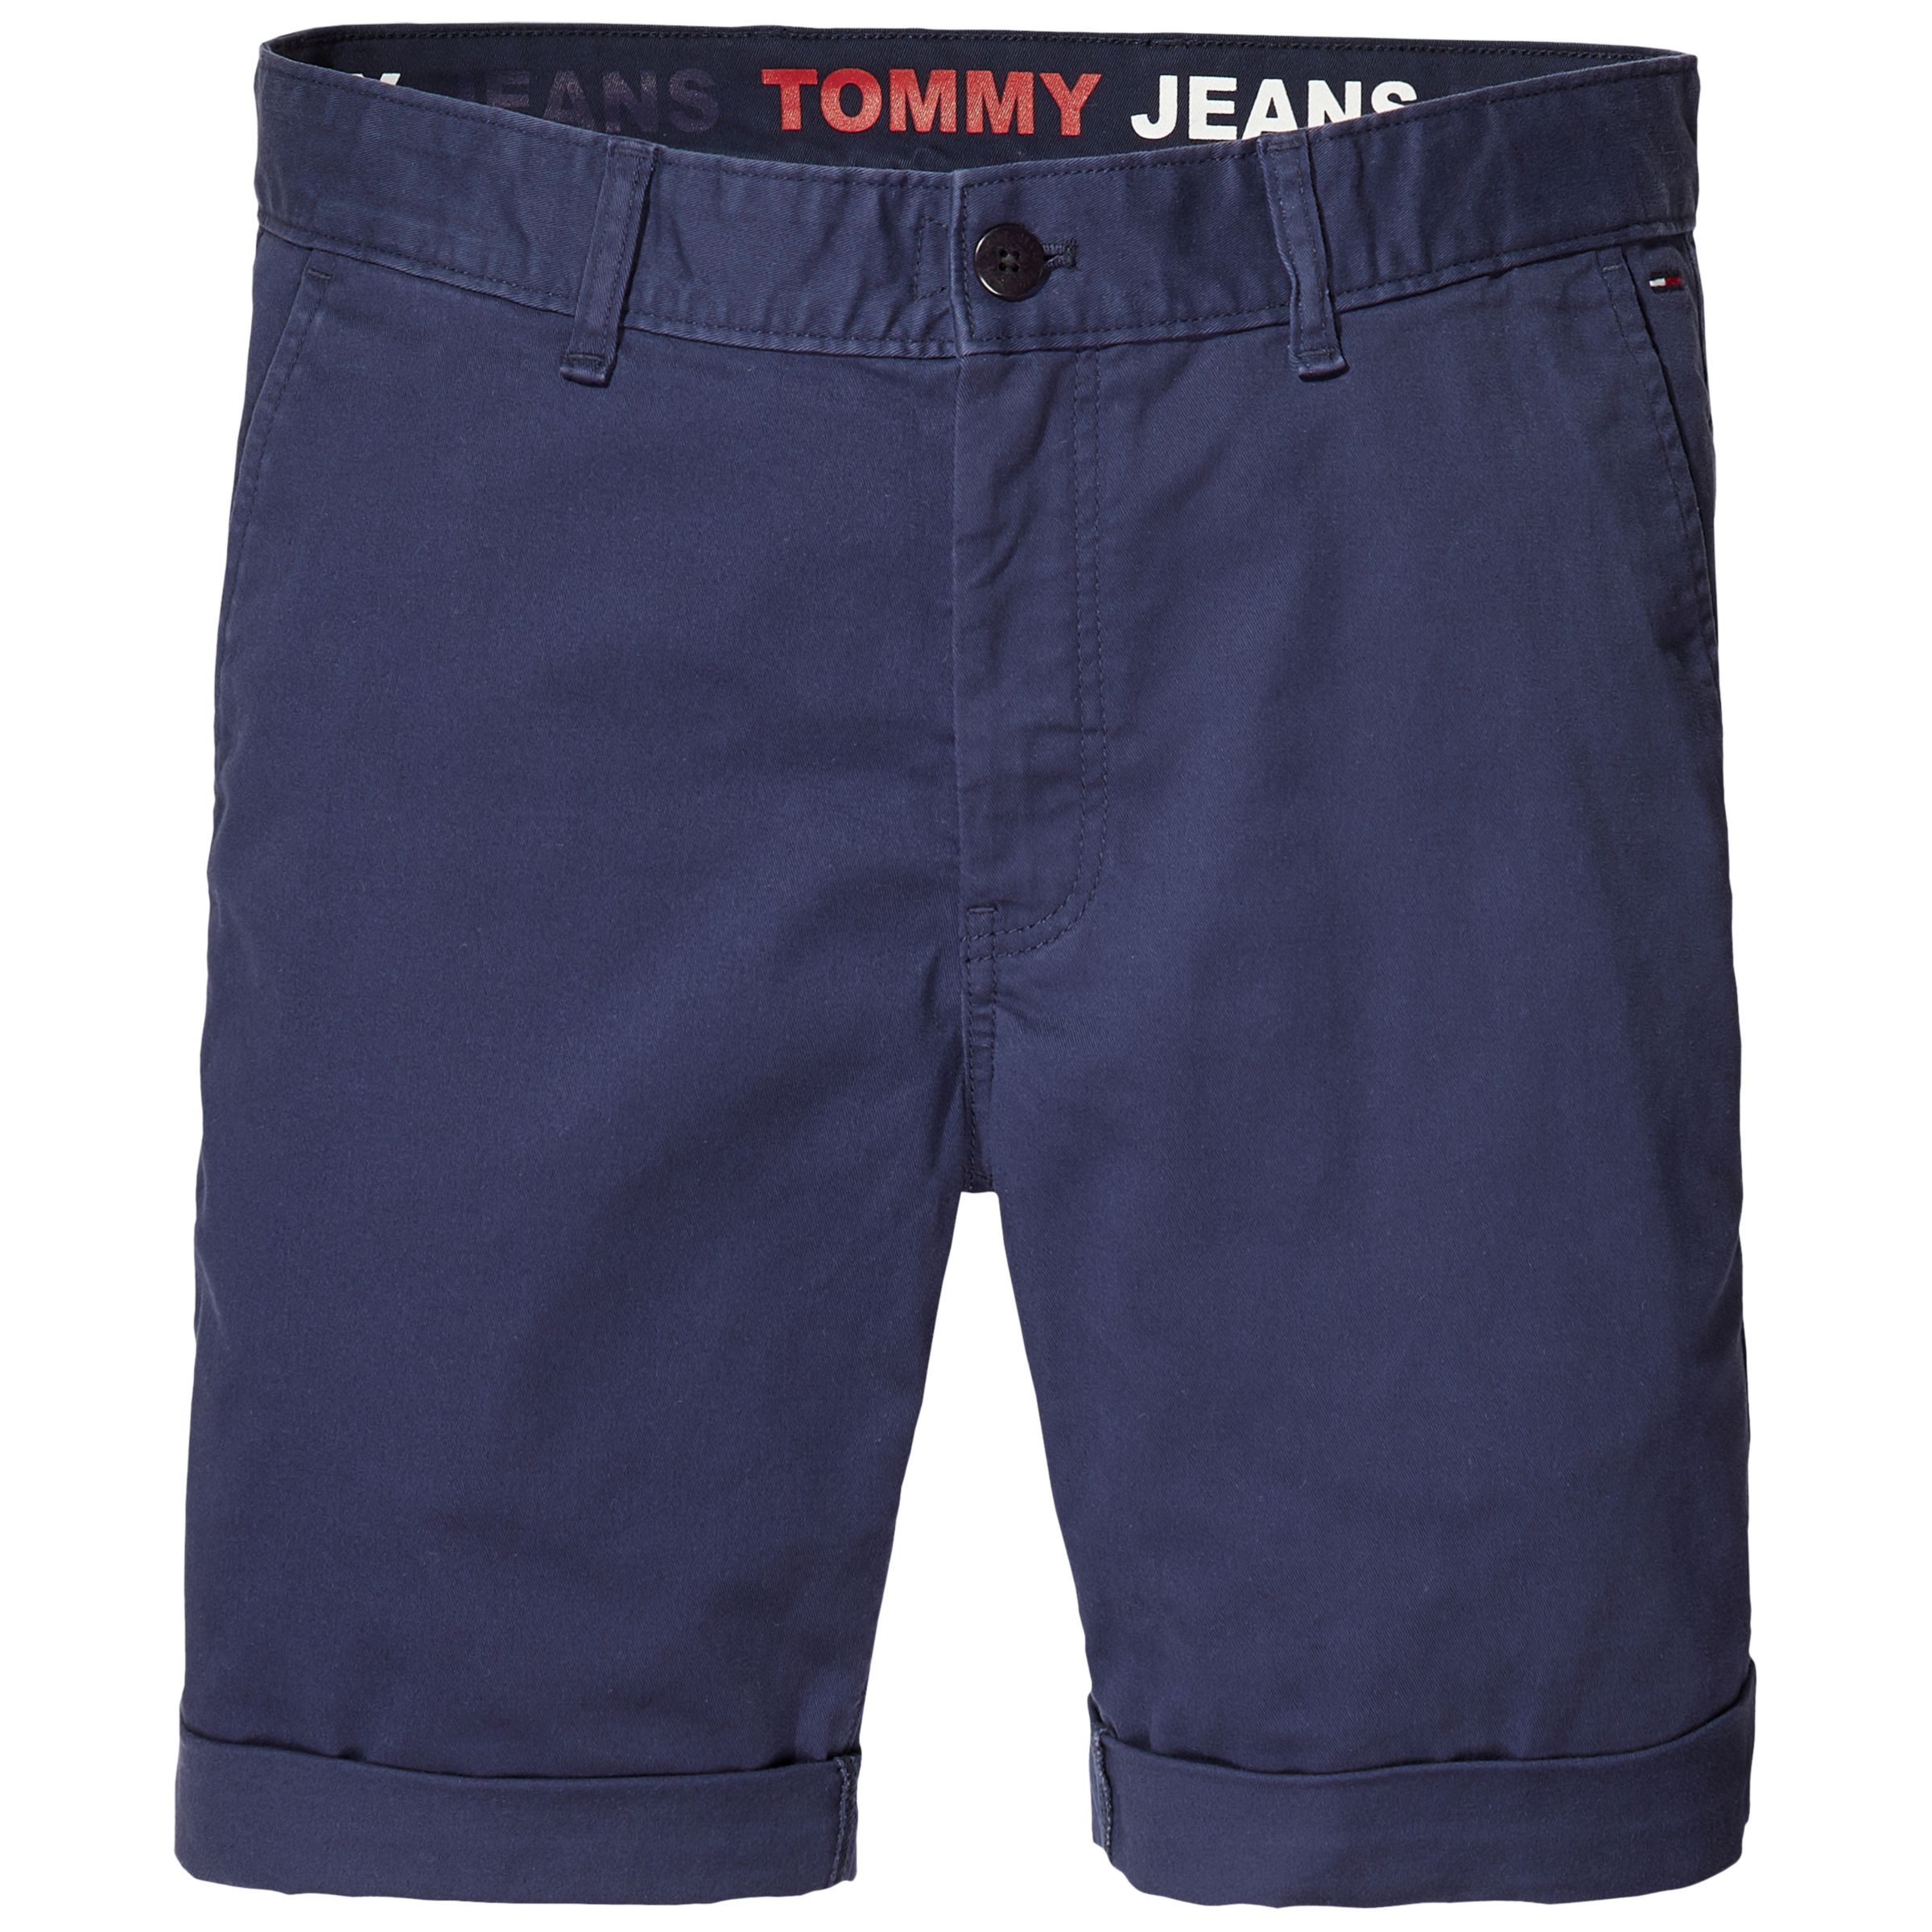 Tommy Jeans Freddy Chino Shorts